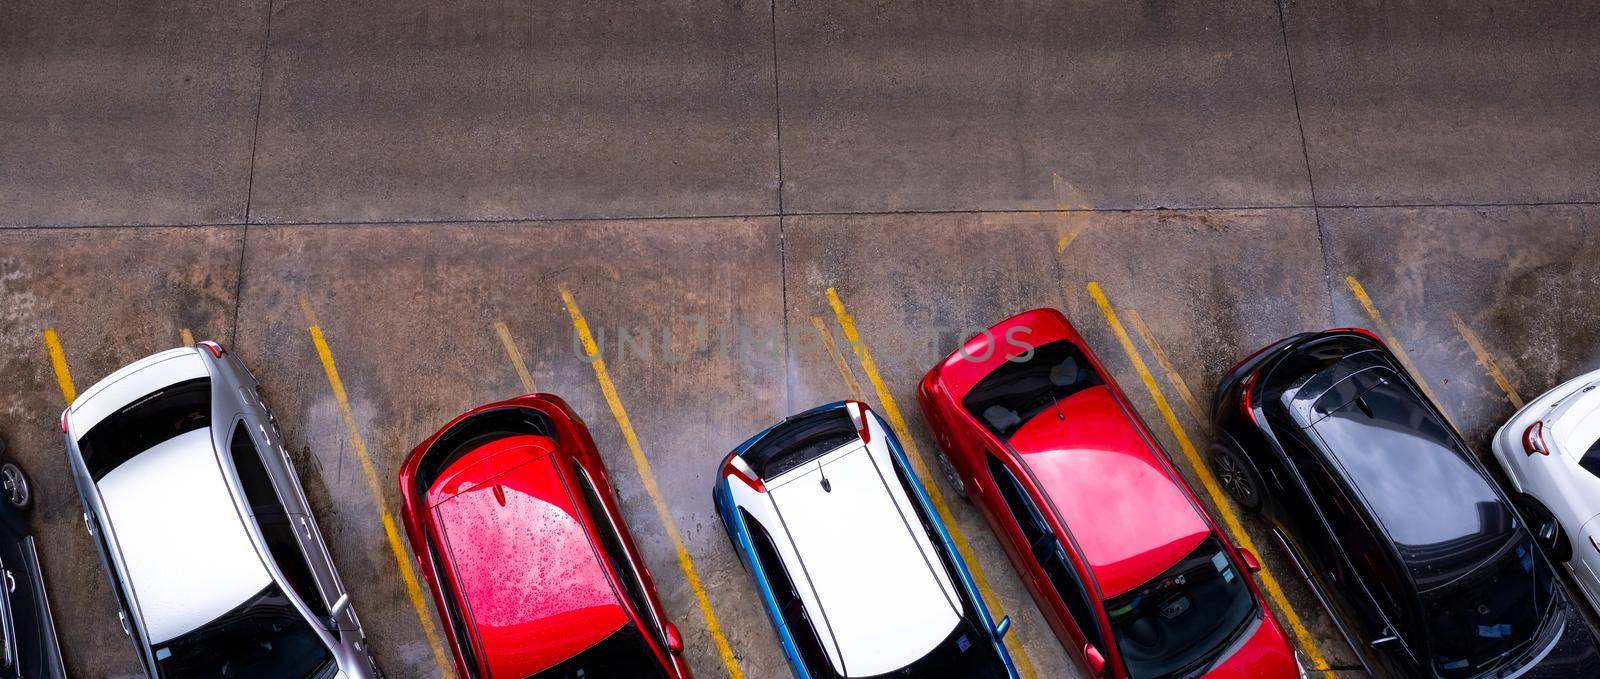 Top view of car parked at concrete car parking lot with yellow line of traffic sign on the street. Above view of car in a row at parking space. No available parking slot. Outside car parking area. by Fahroni